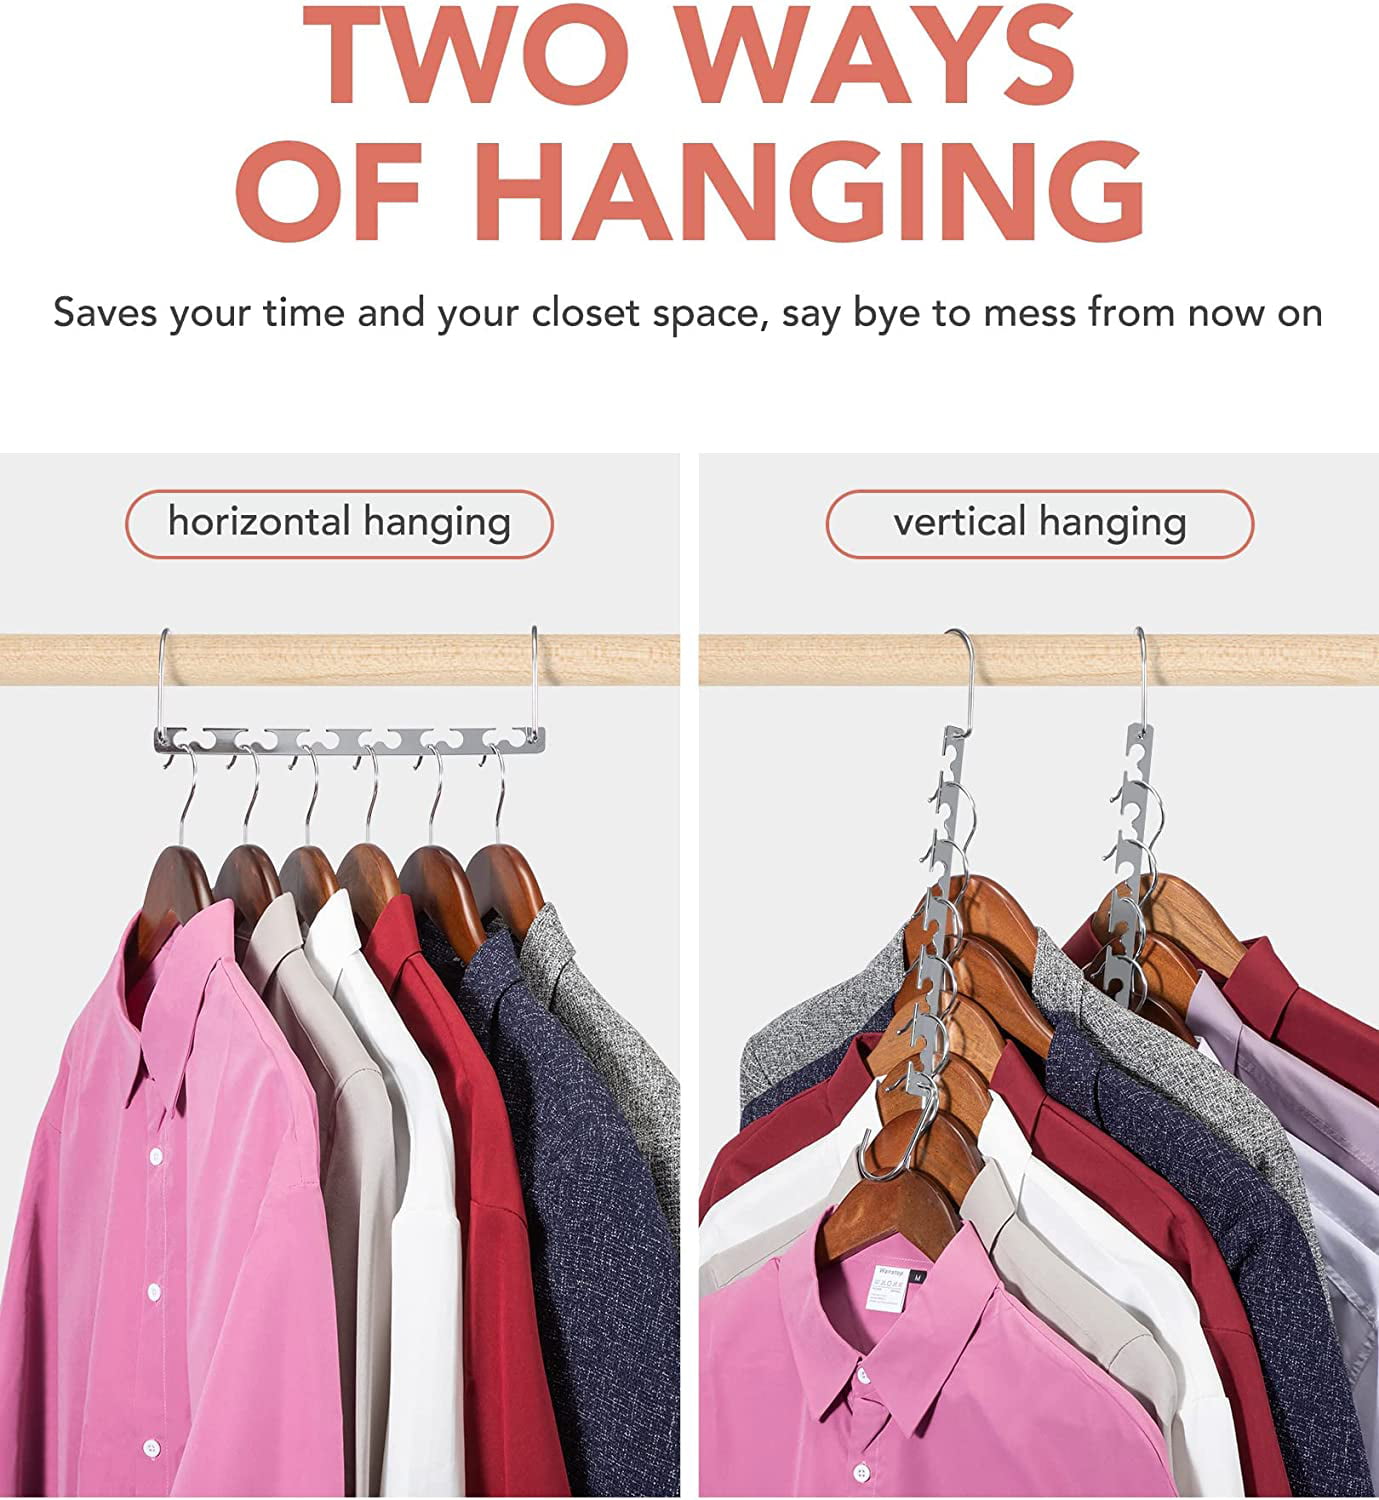 Liangmall Hangers Space Saving Upgraded, Expand 6 to 9 Holes Magic Clothes Hanger Organizer, Stainless Steel Space Saving Hangers Closet Organizers